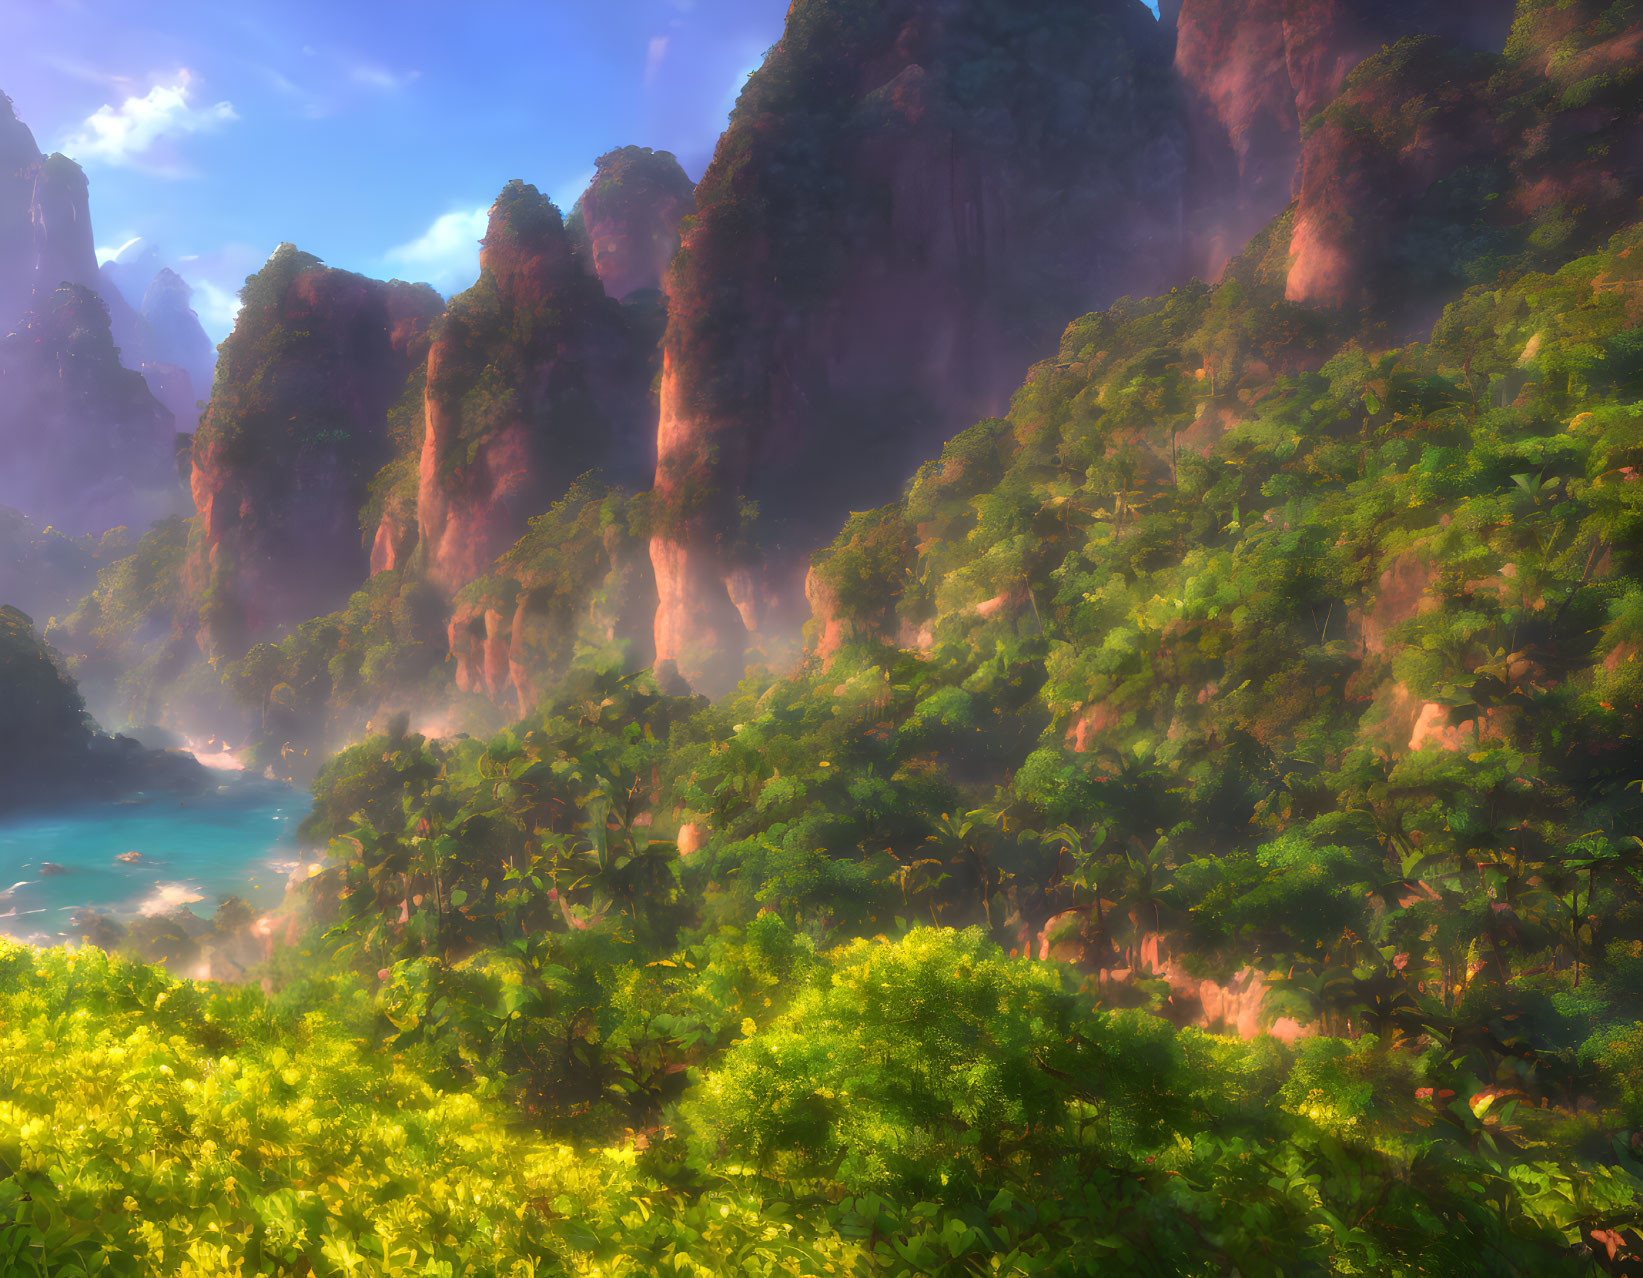 Cliffside covered in lush greenery at sunrise over turquoise sea